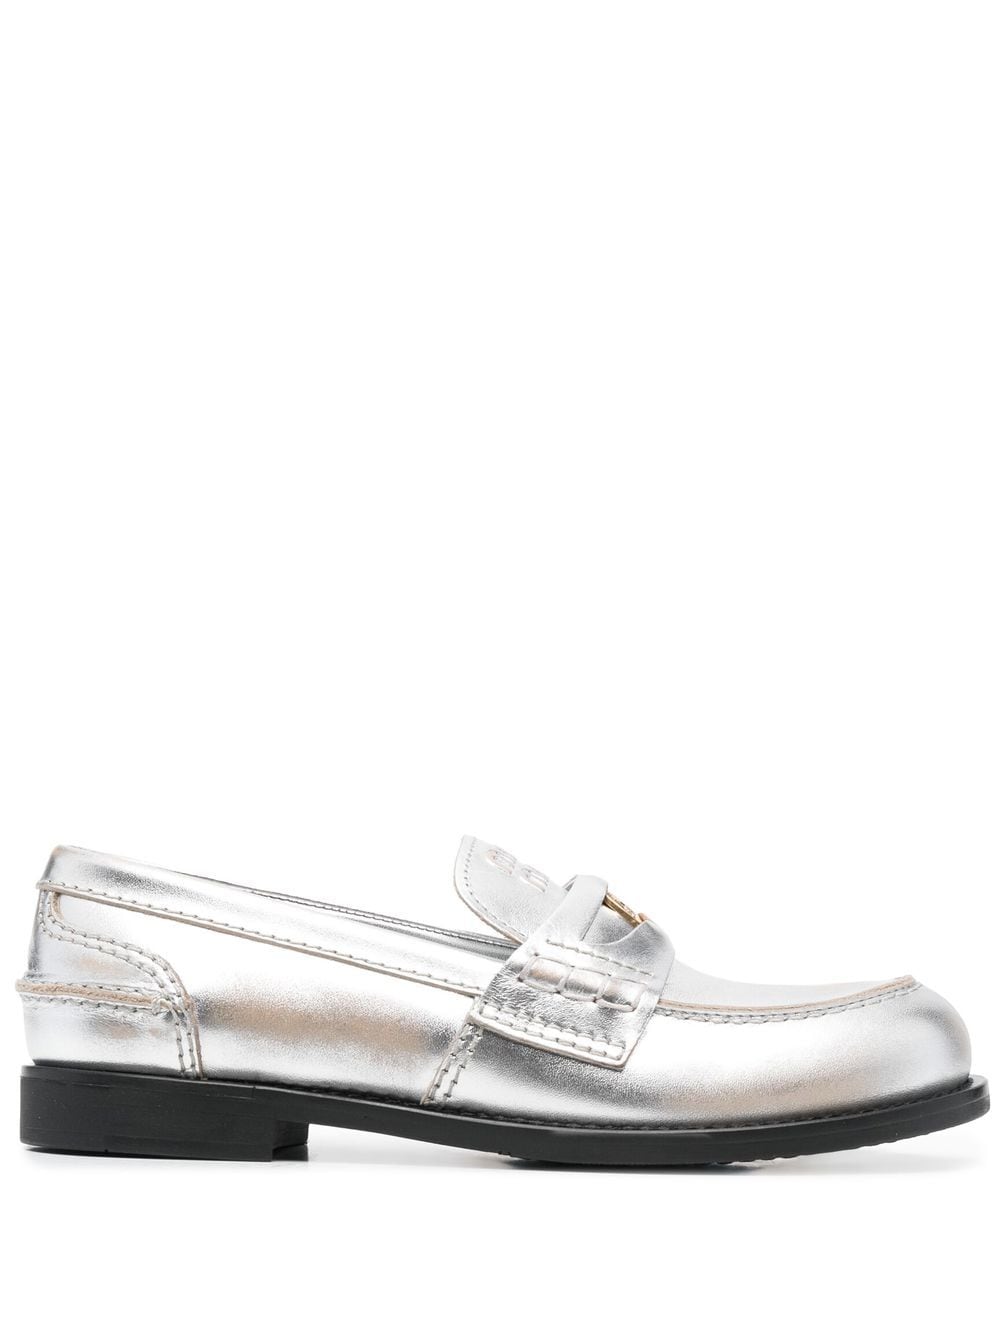 metallic leather penny loafers Profile Picture